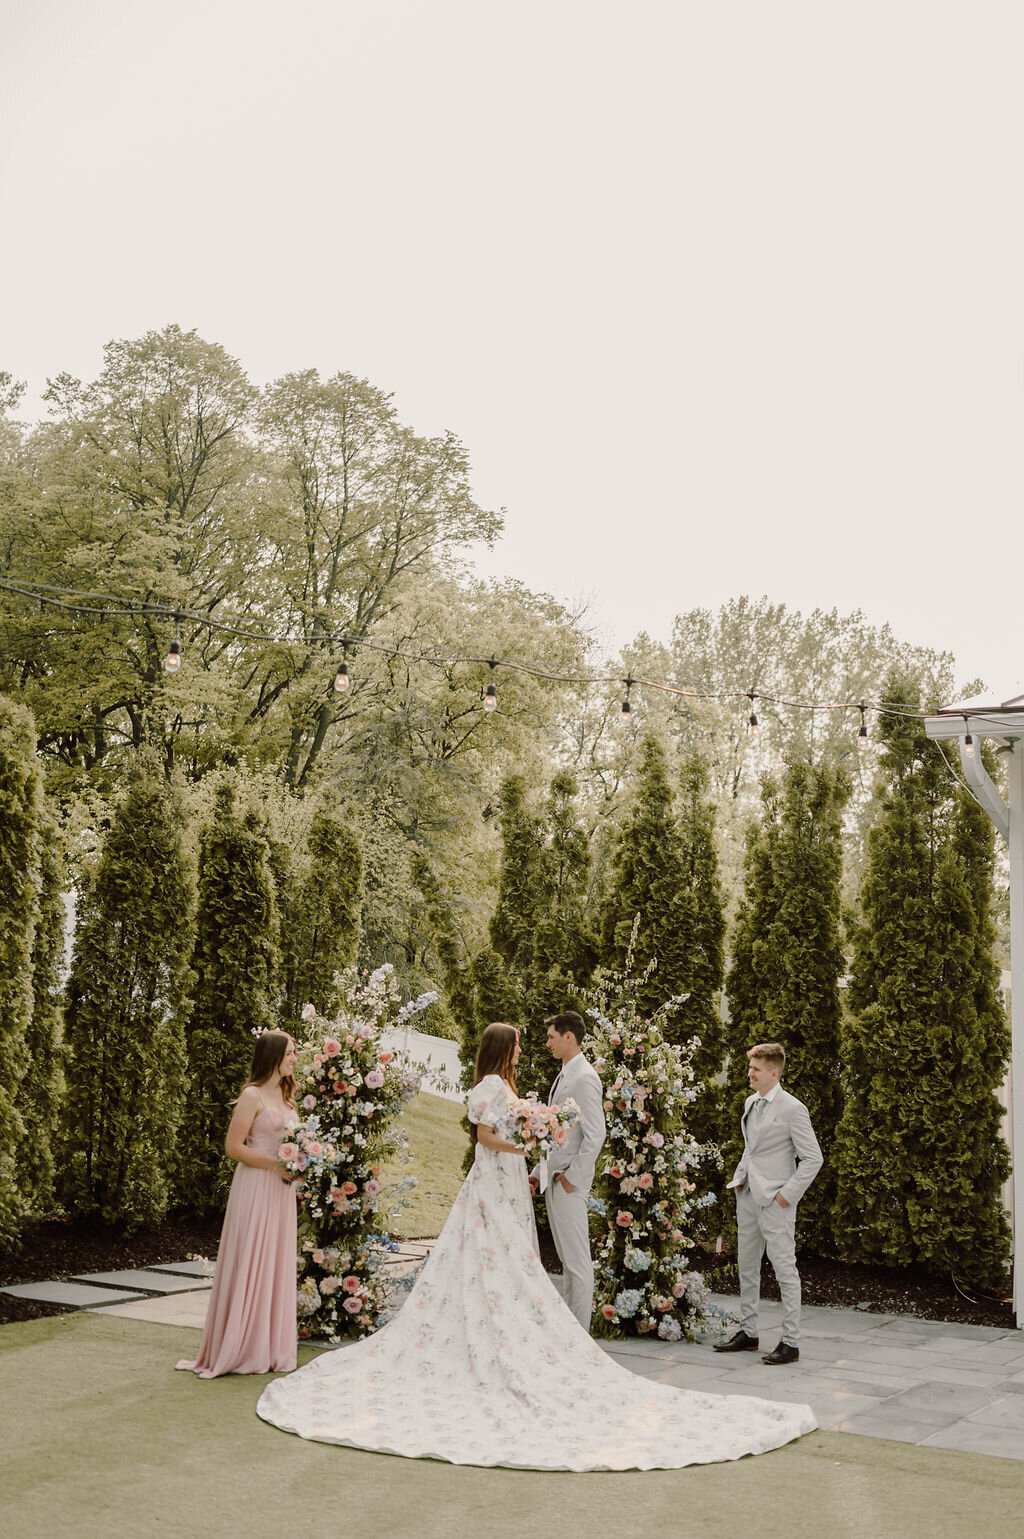 Intimate garden wedding ceremony surrounded by lush florals and greenery